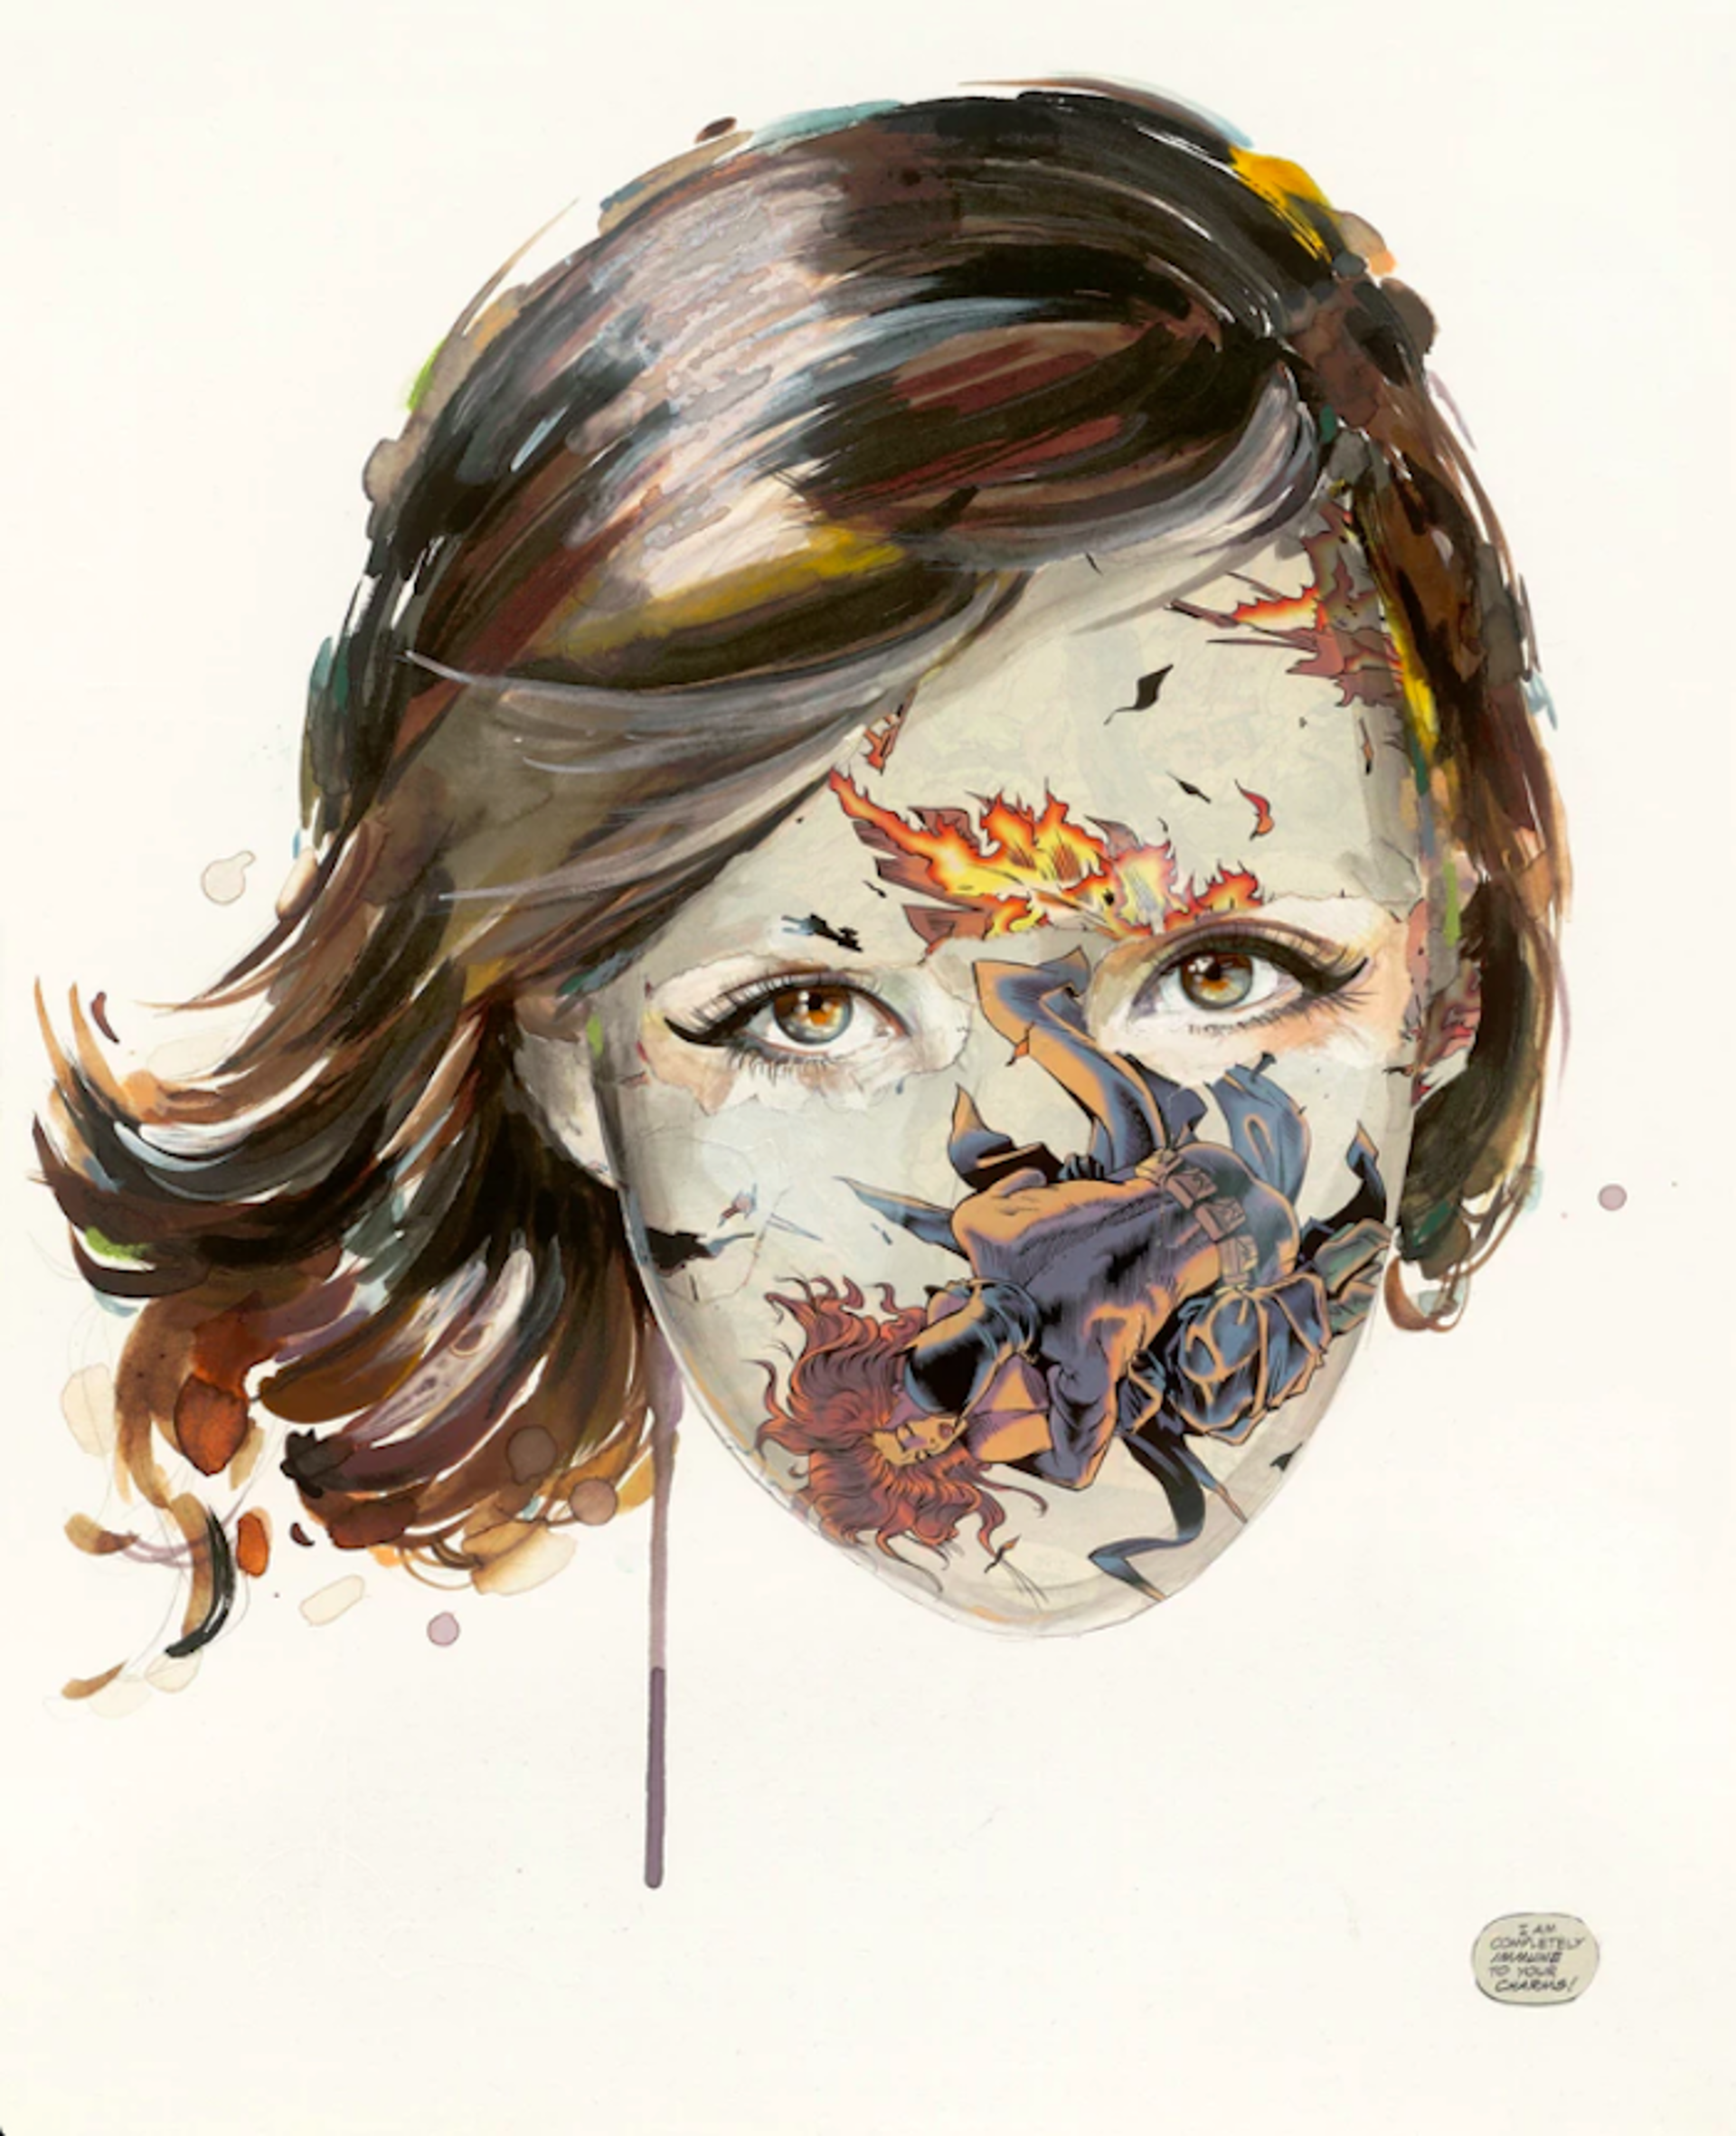 La Cage, Immunisee A Ses Charmes by Sandra Chevrier